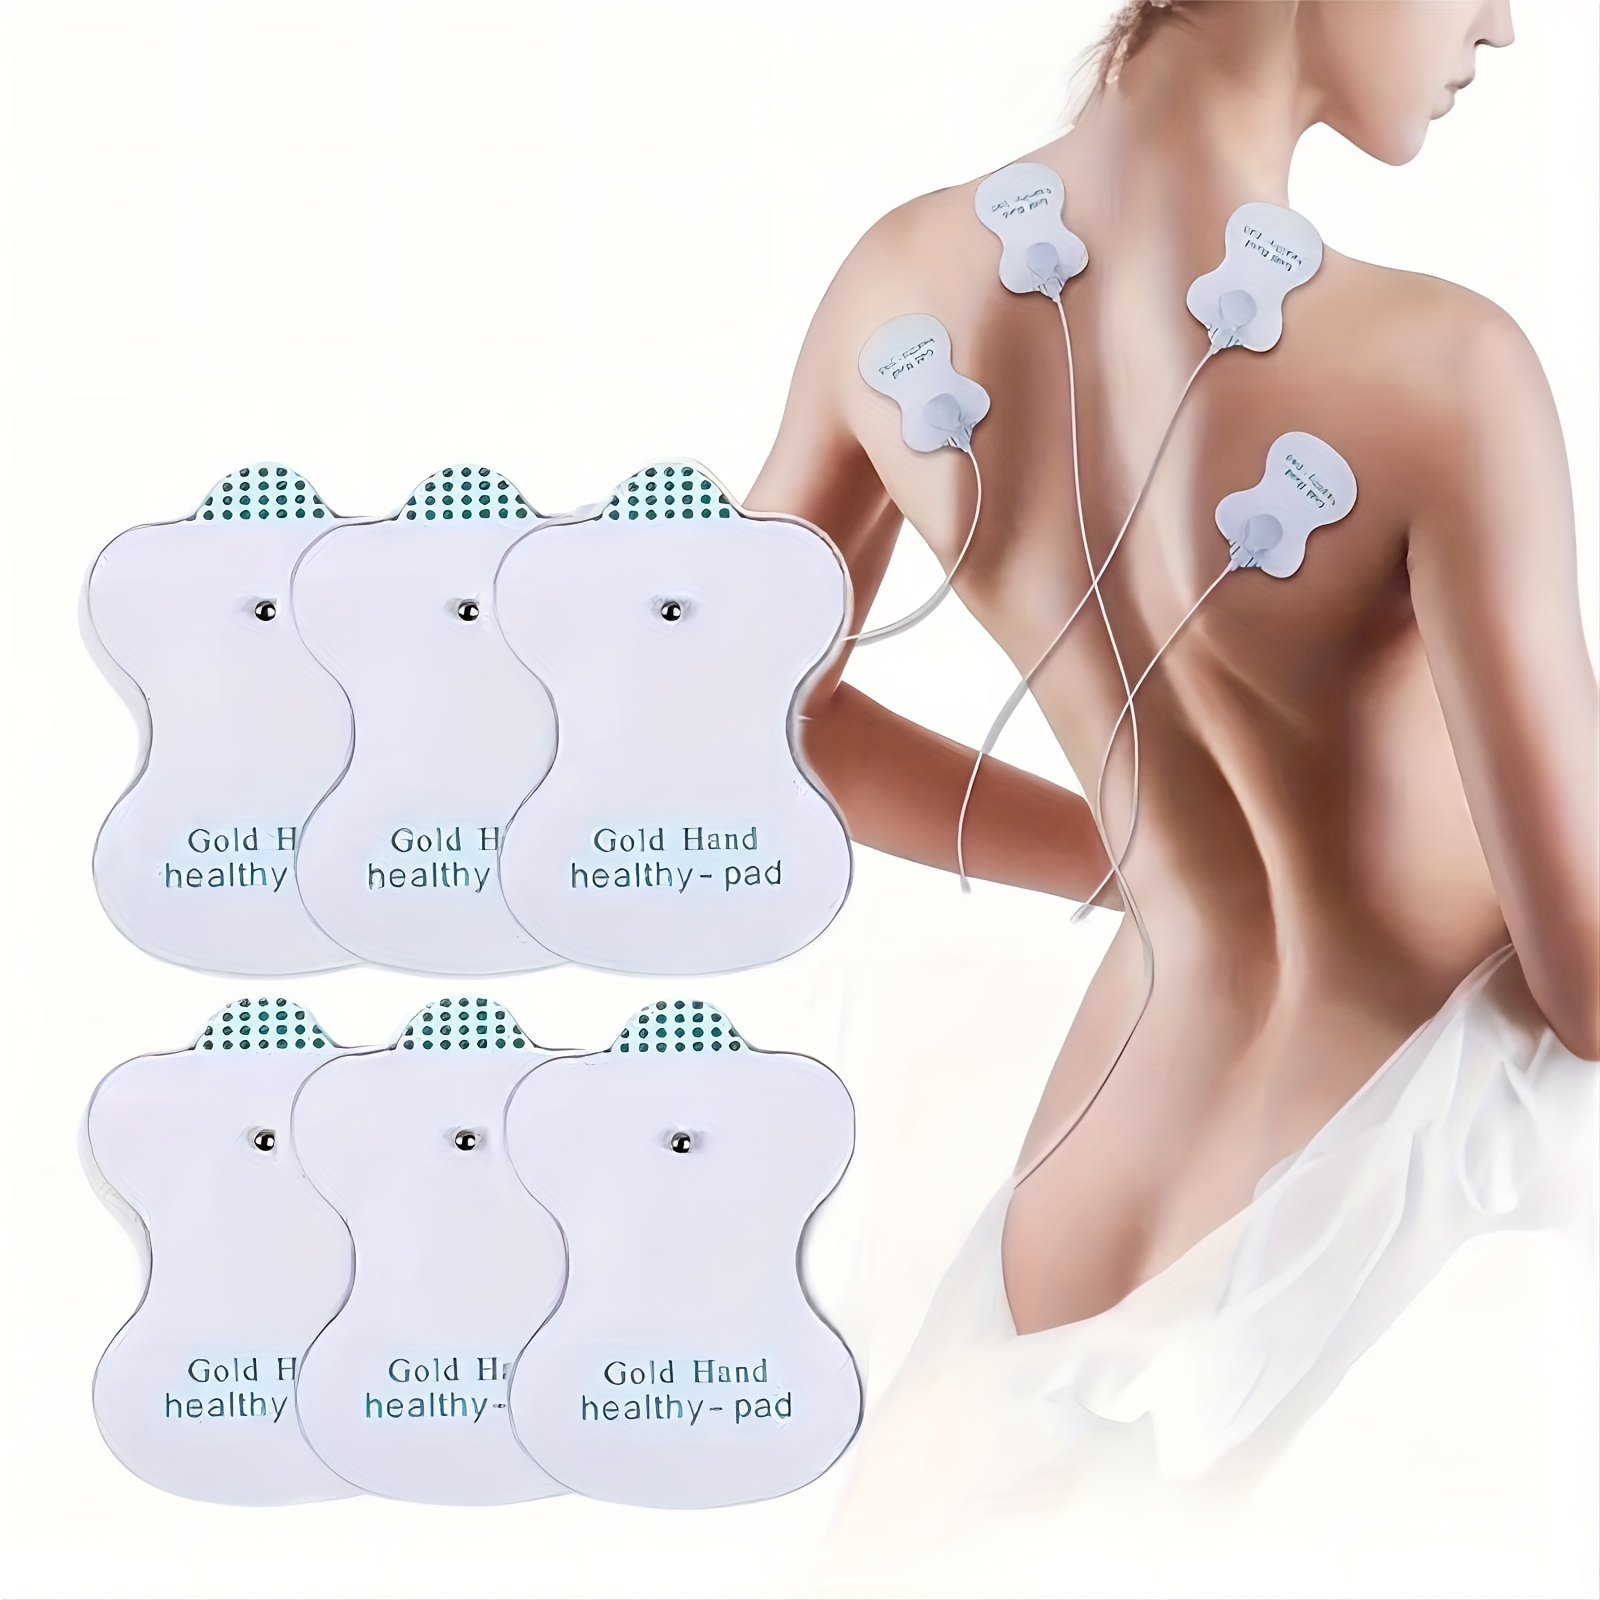 10pcs Adhesive Tens Electrode Gel Pads Body Acupuncture Therapy Massager  Therapeutic Pulse Stimulator Electro Sticker Slimming - AliExpress